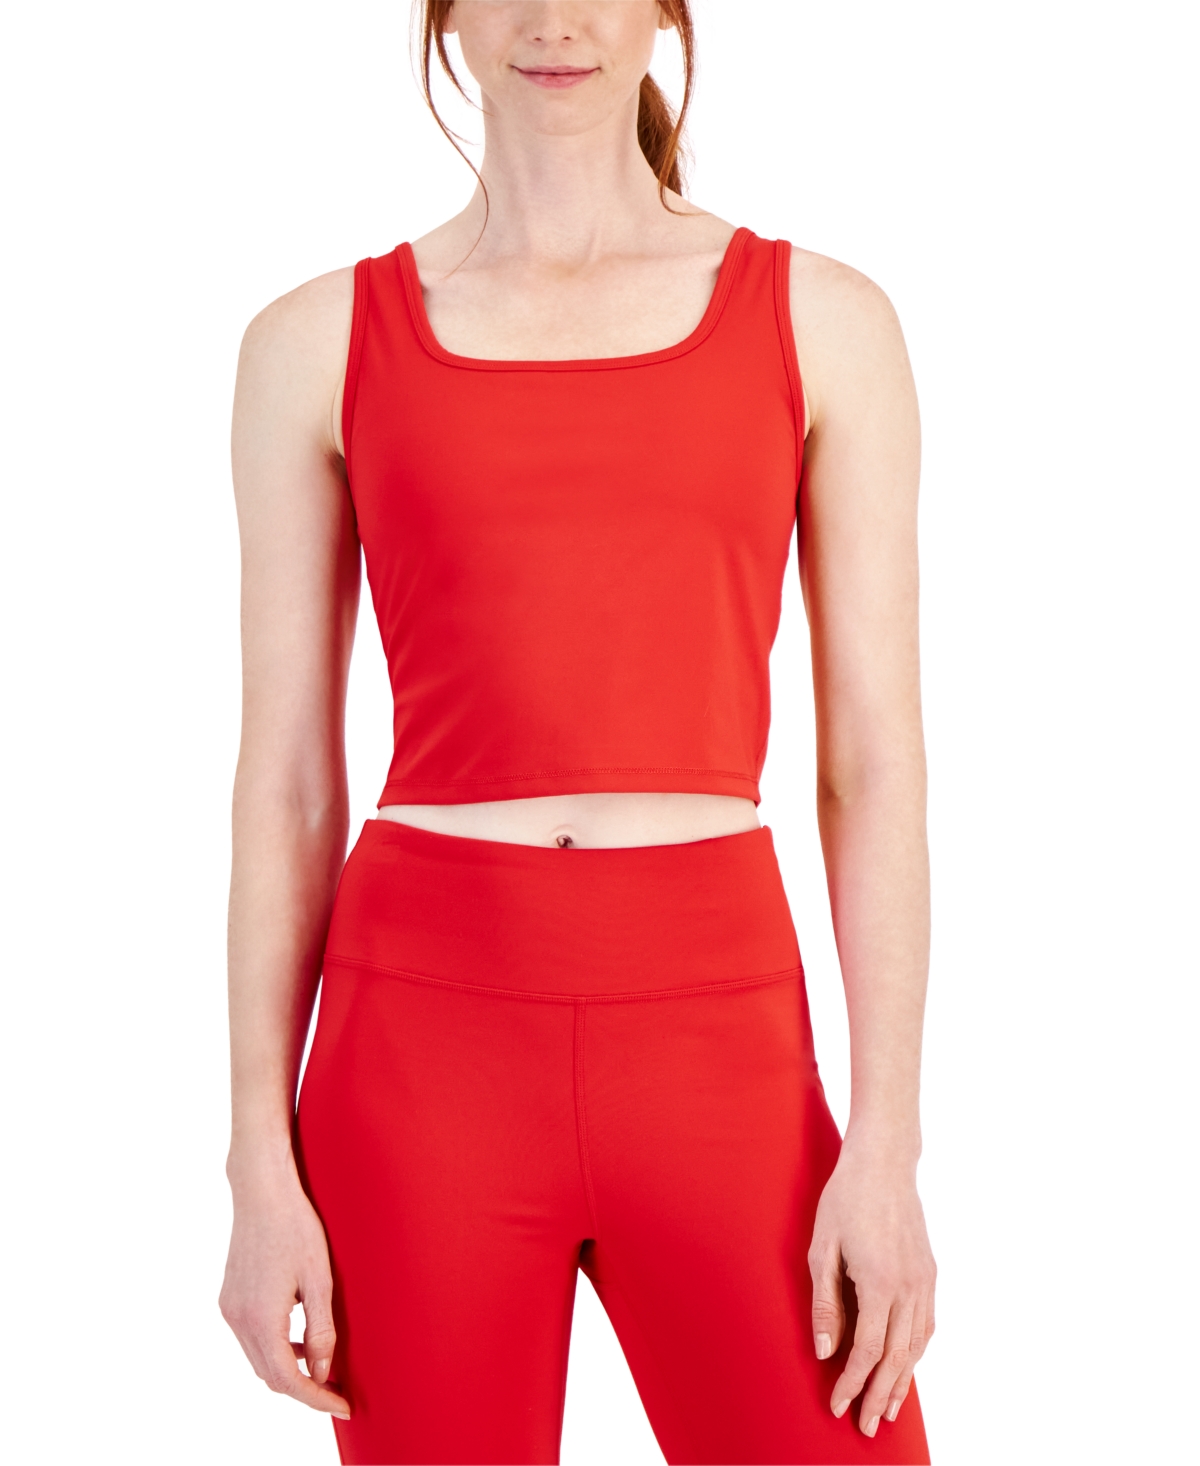 Women's Cropped Tank Top, Created for Macy's - Gumball Red